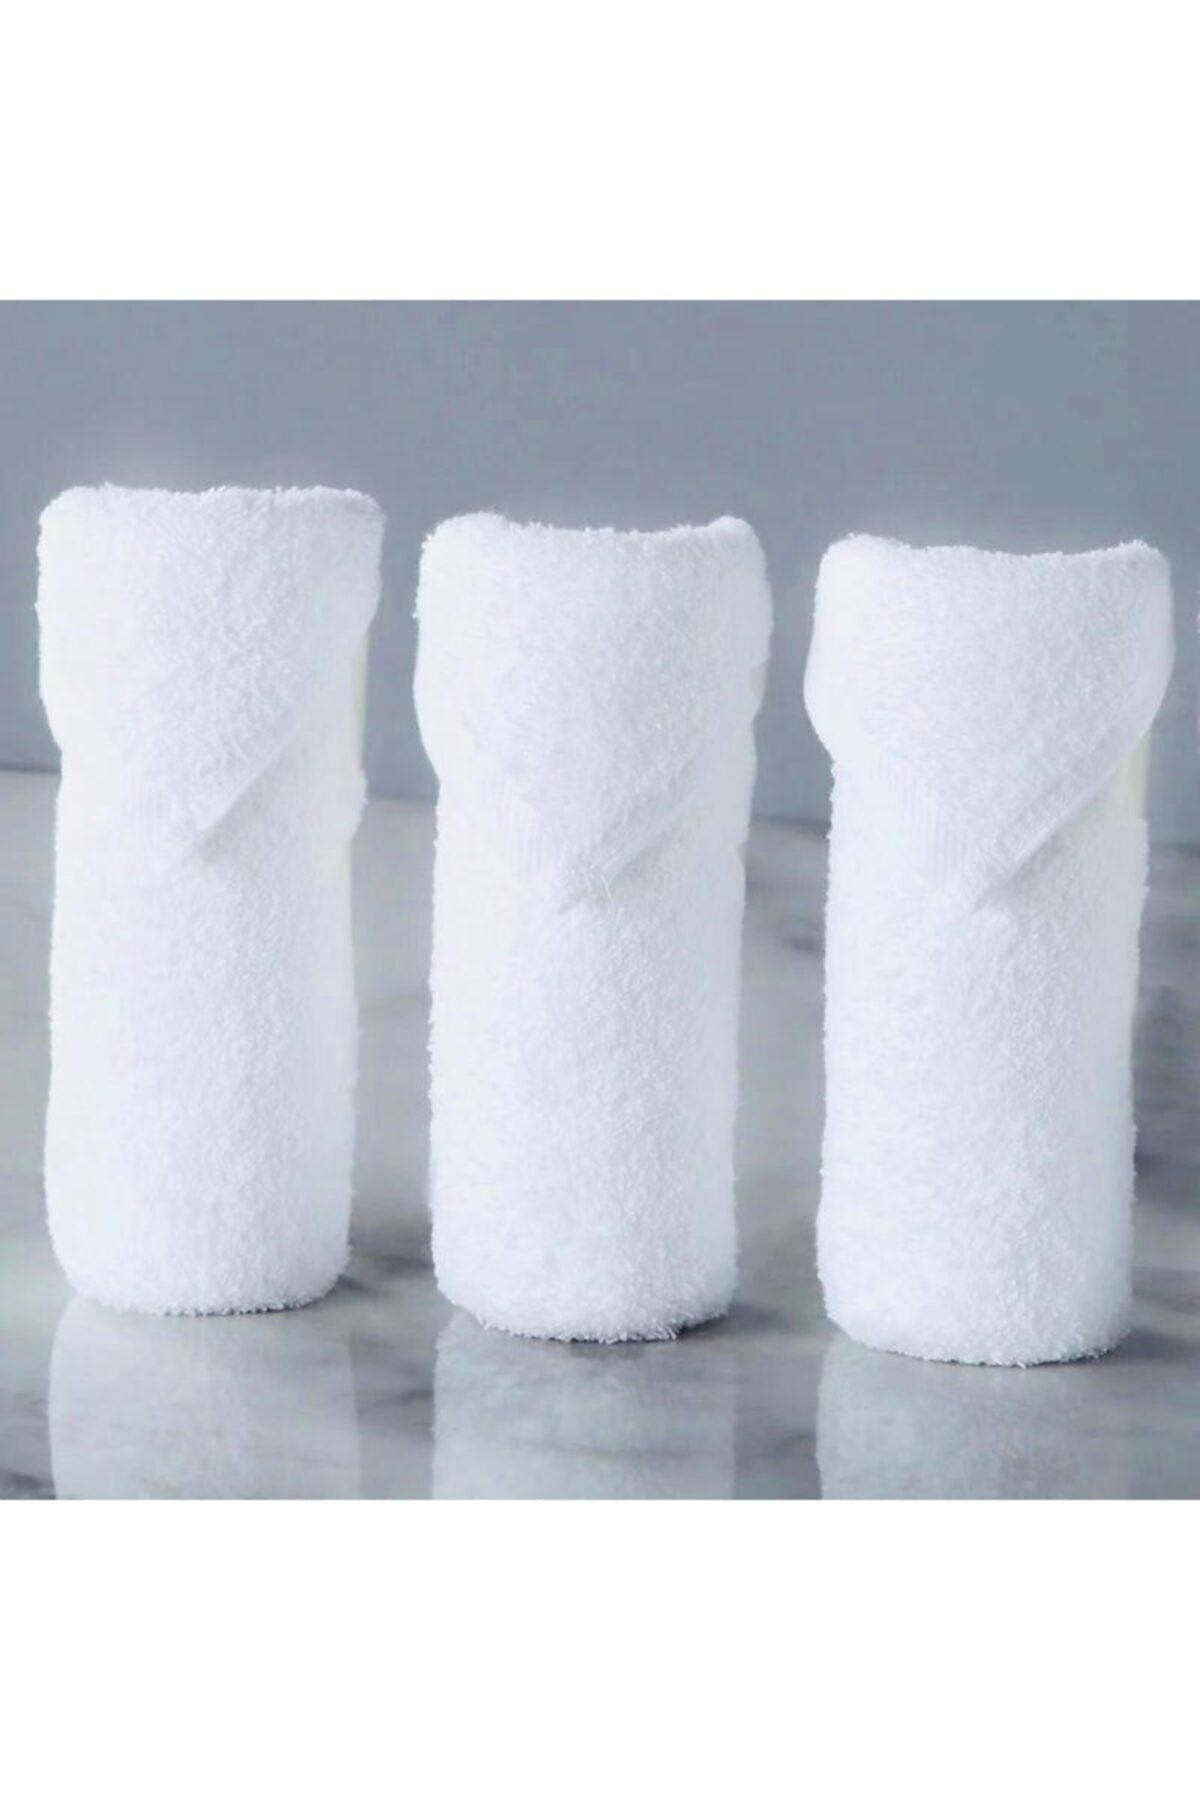 100% Cotton Hand and Face Towel Set of 6 White Towels 30x50 - Swordslife